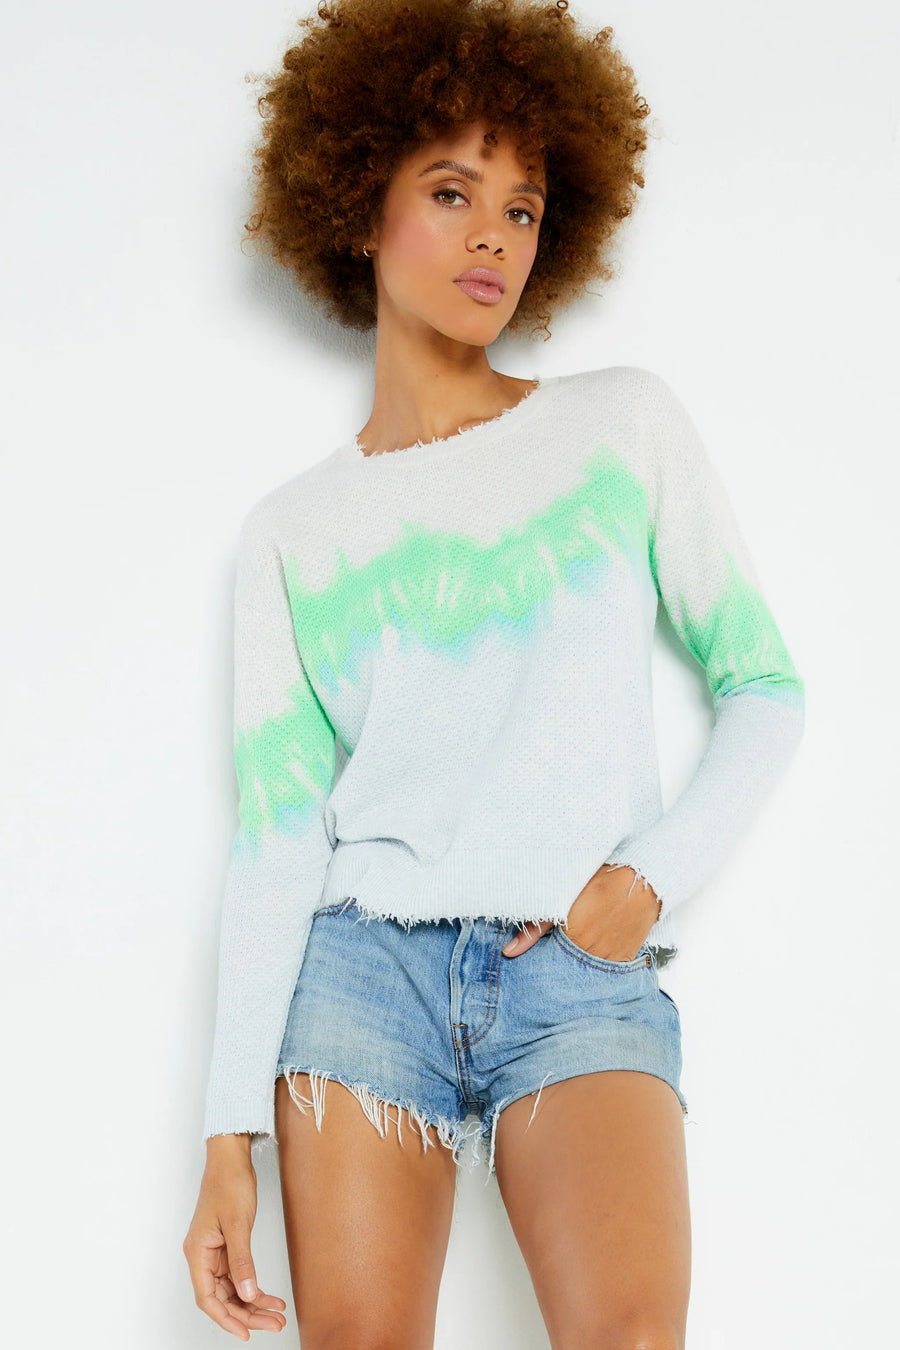 LISA TODD Sunrise Glow Sweater in Color: 